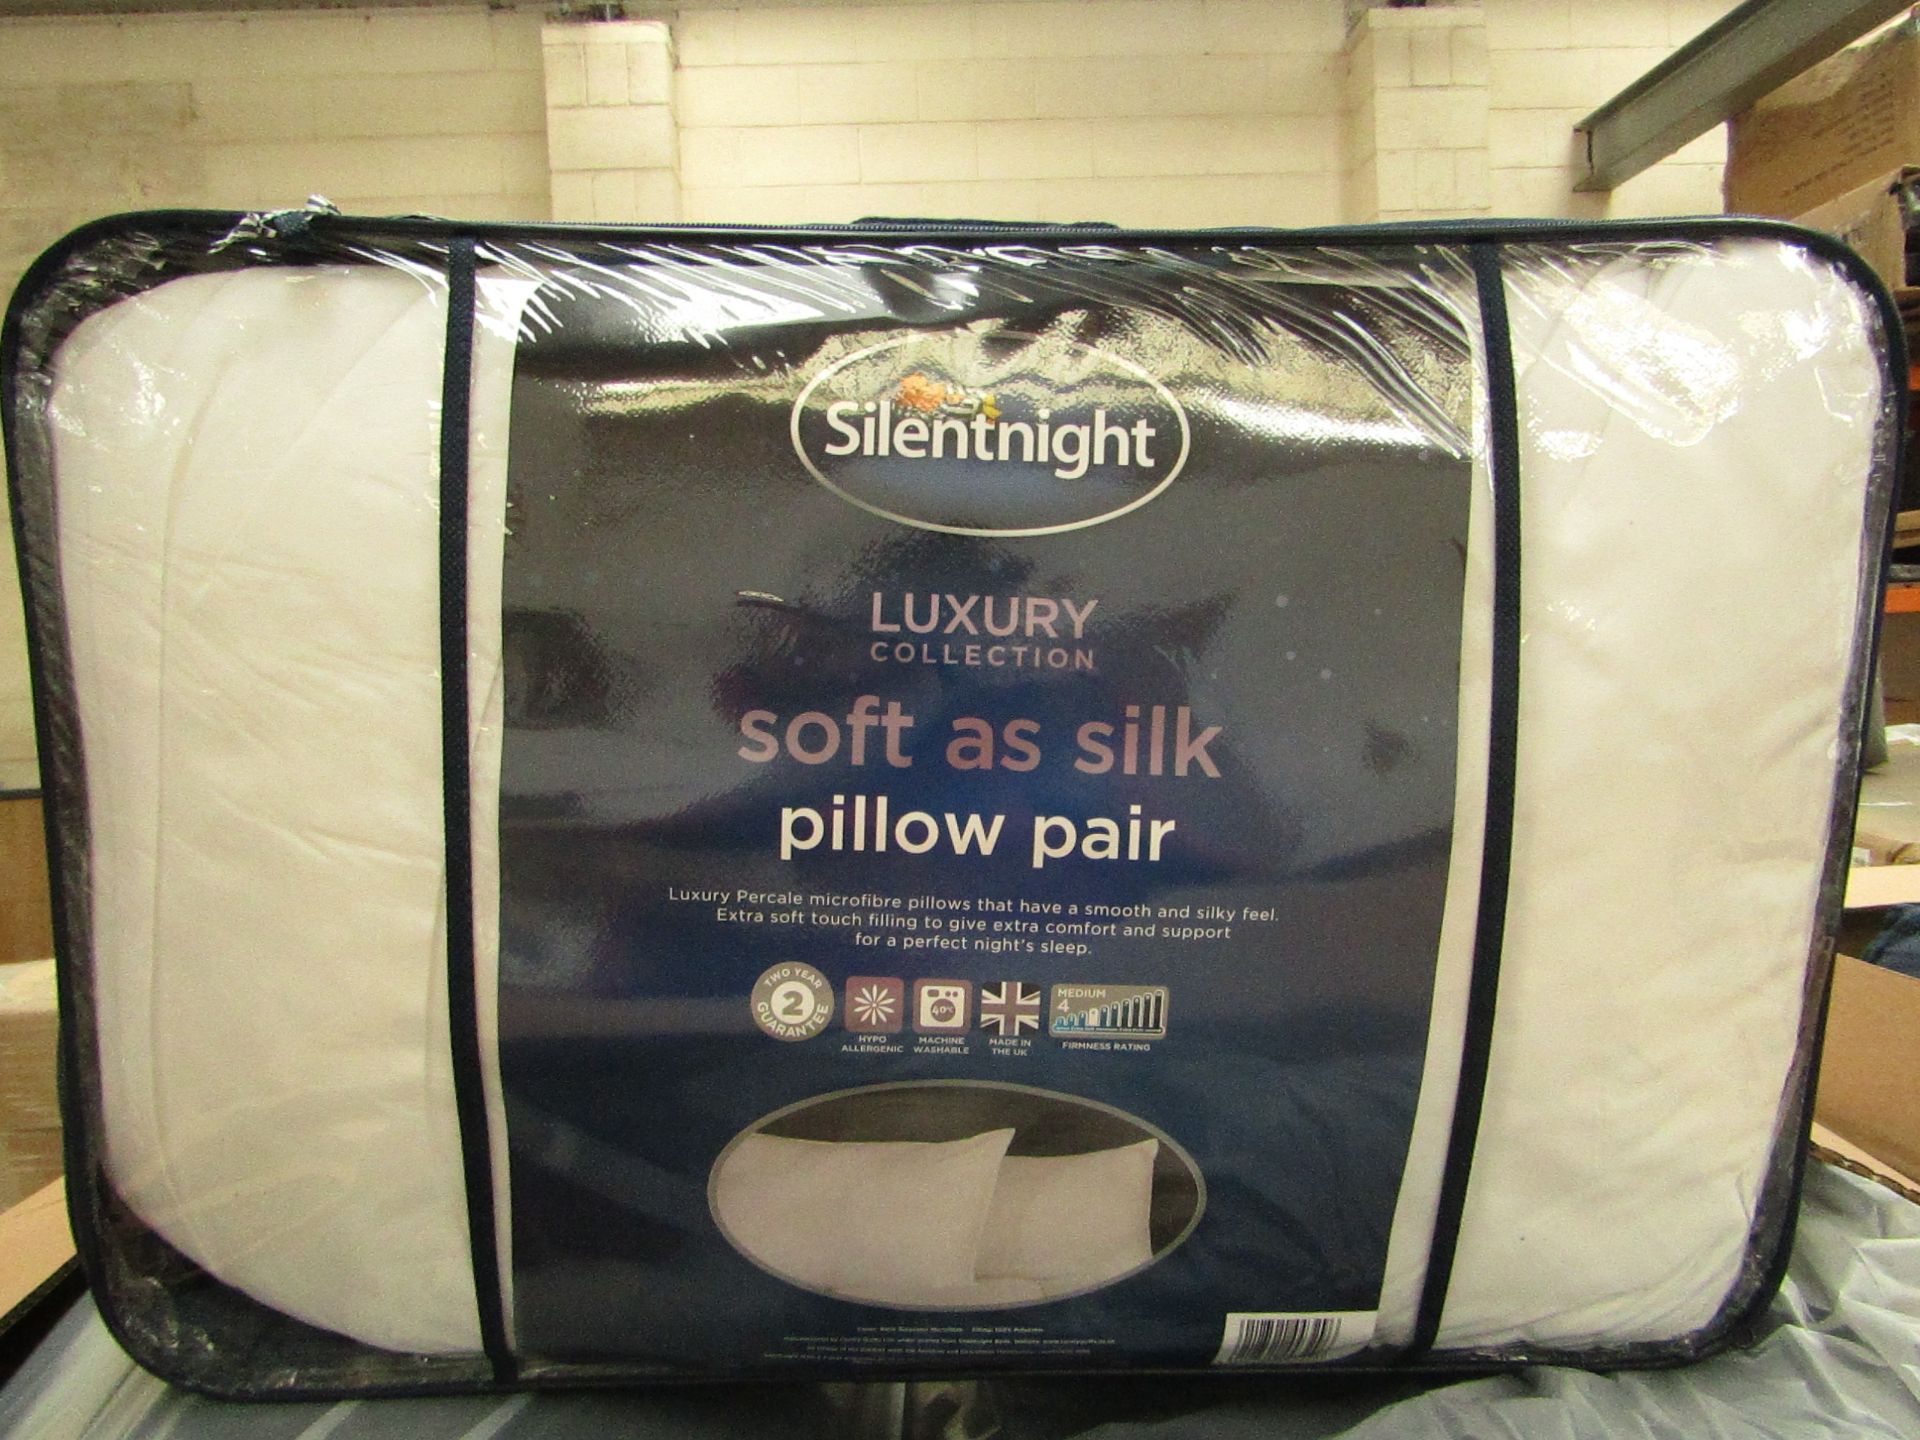 6x Silentnight soft as silk pillow pairs, new in packaging. All 6 are in a bundle.